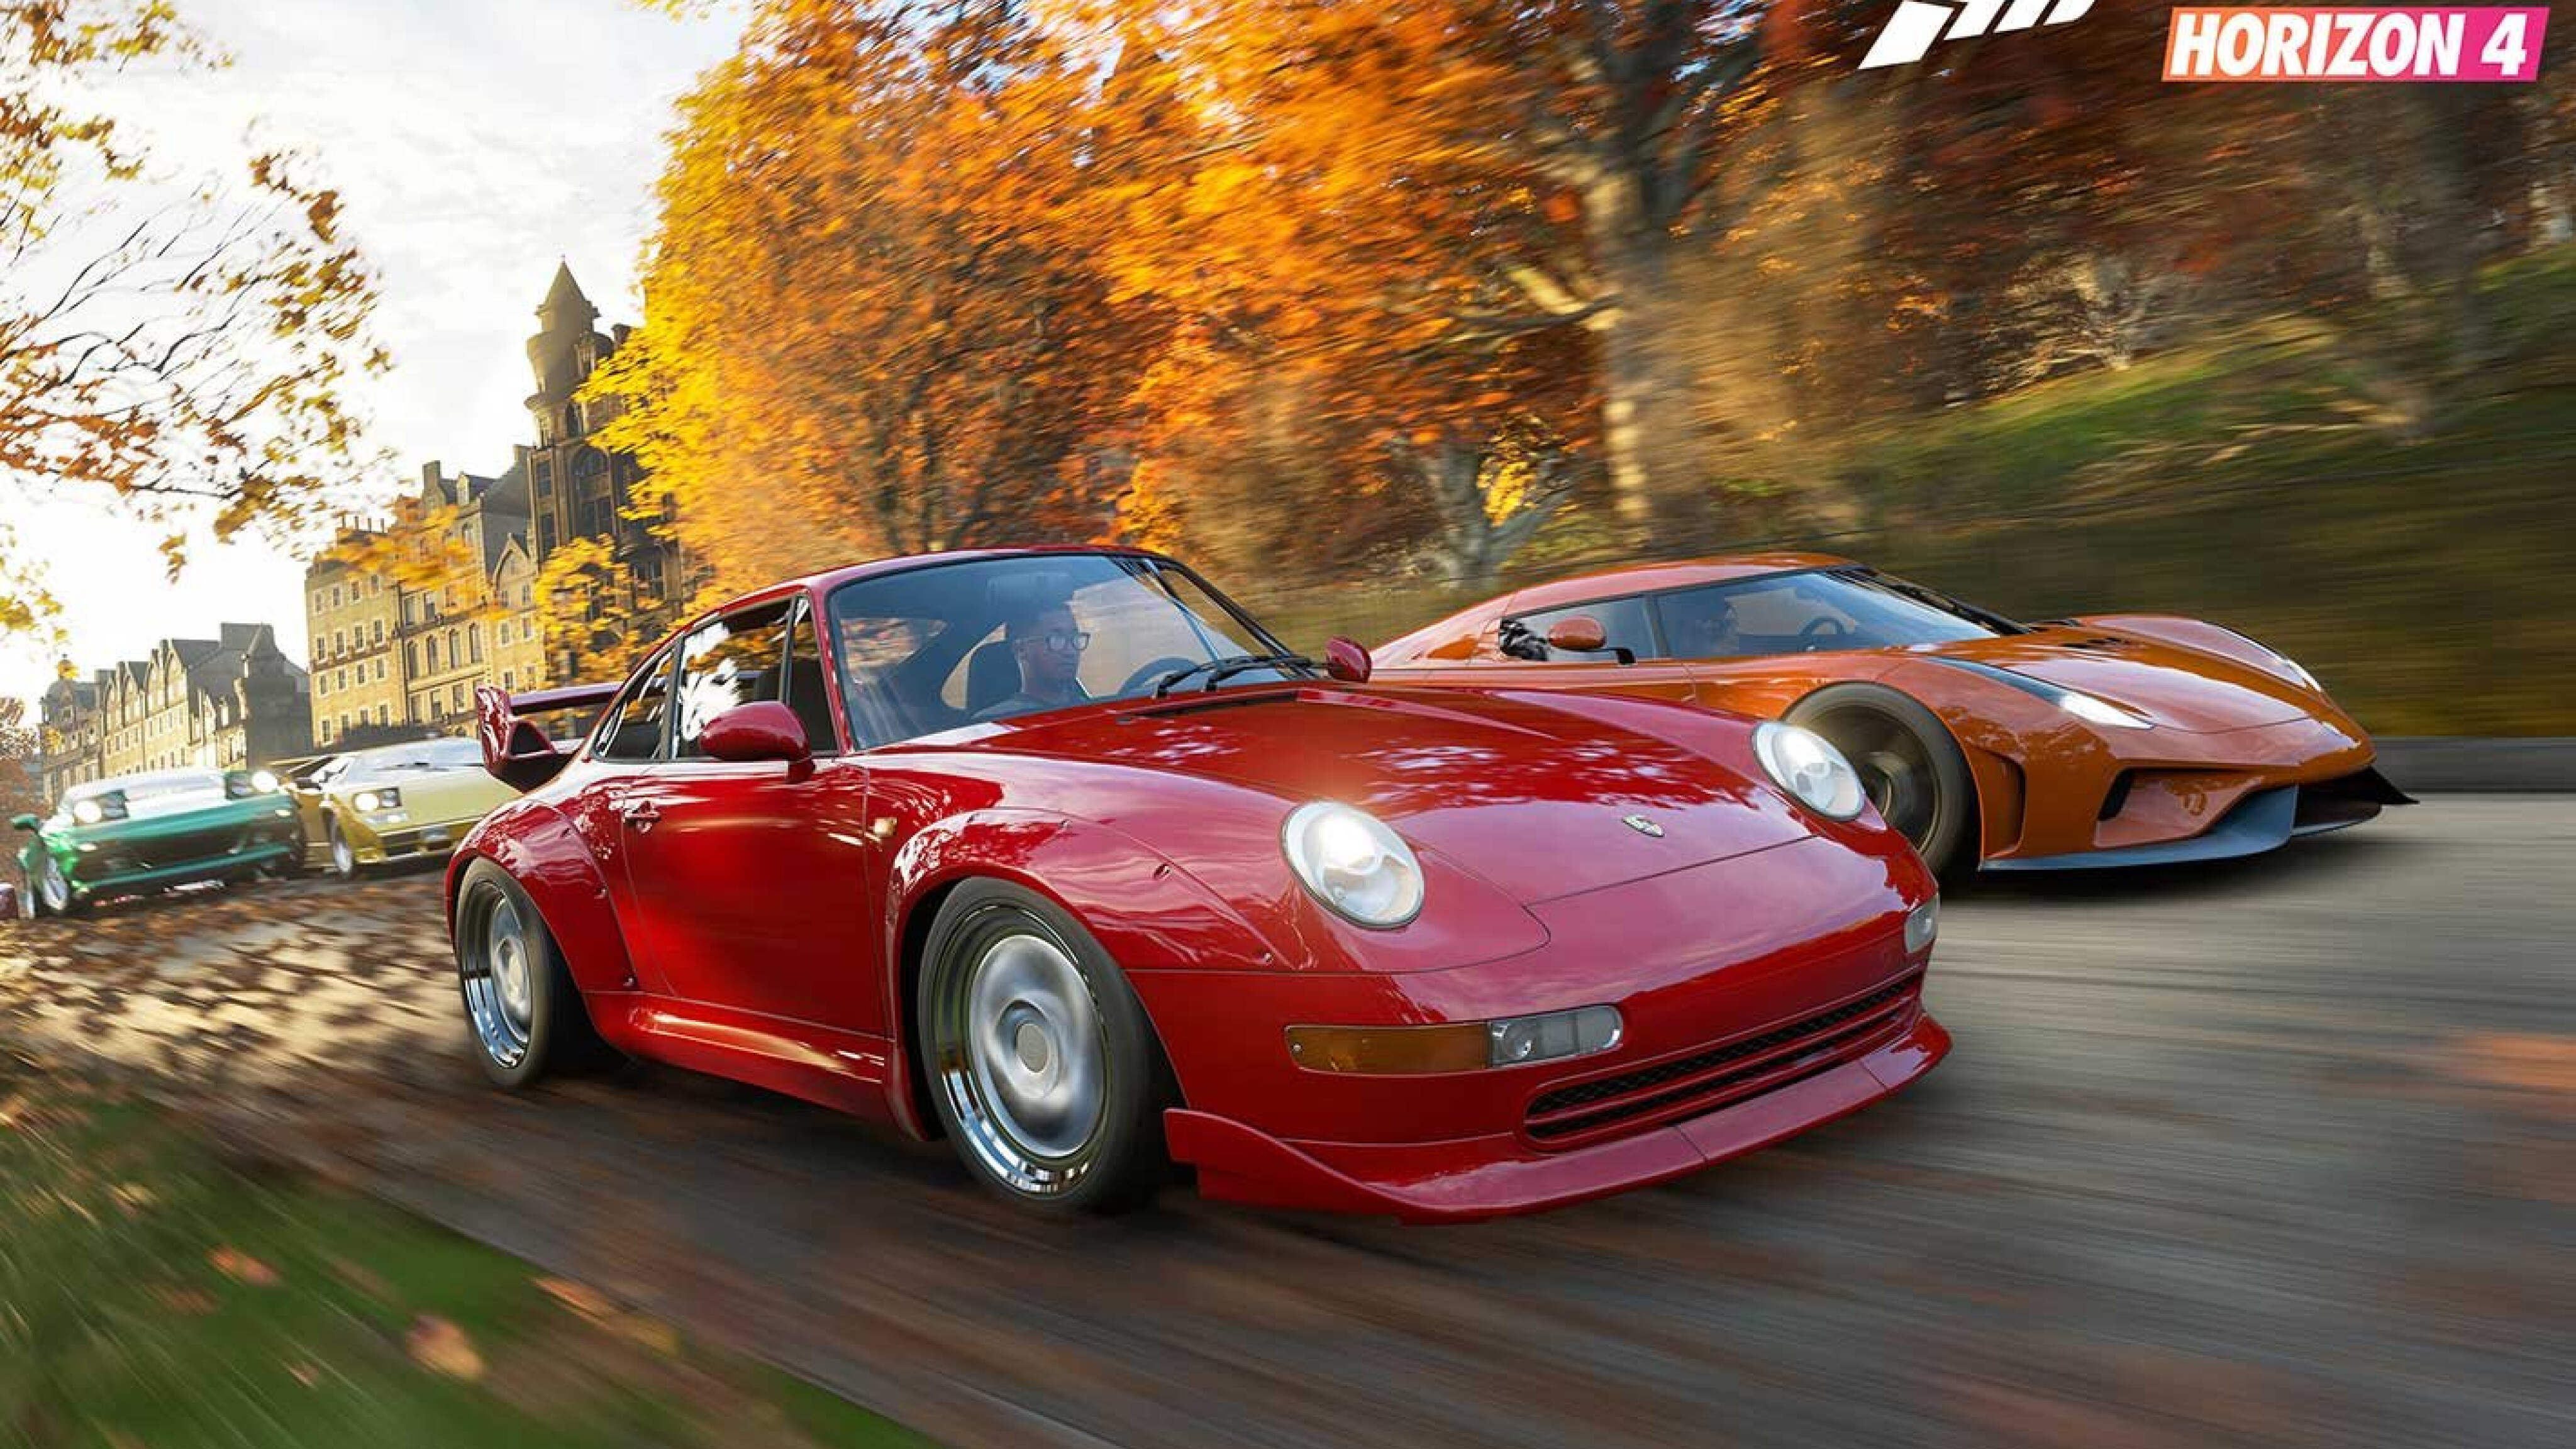 Massive Forza Horizon 4 Update Could Add More Than 100 Cars